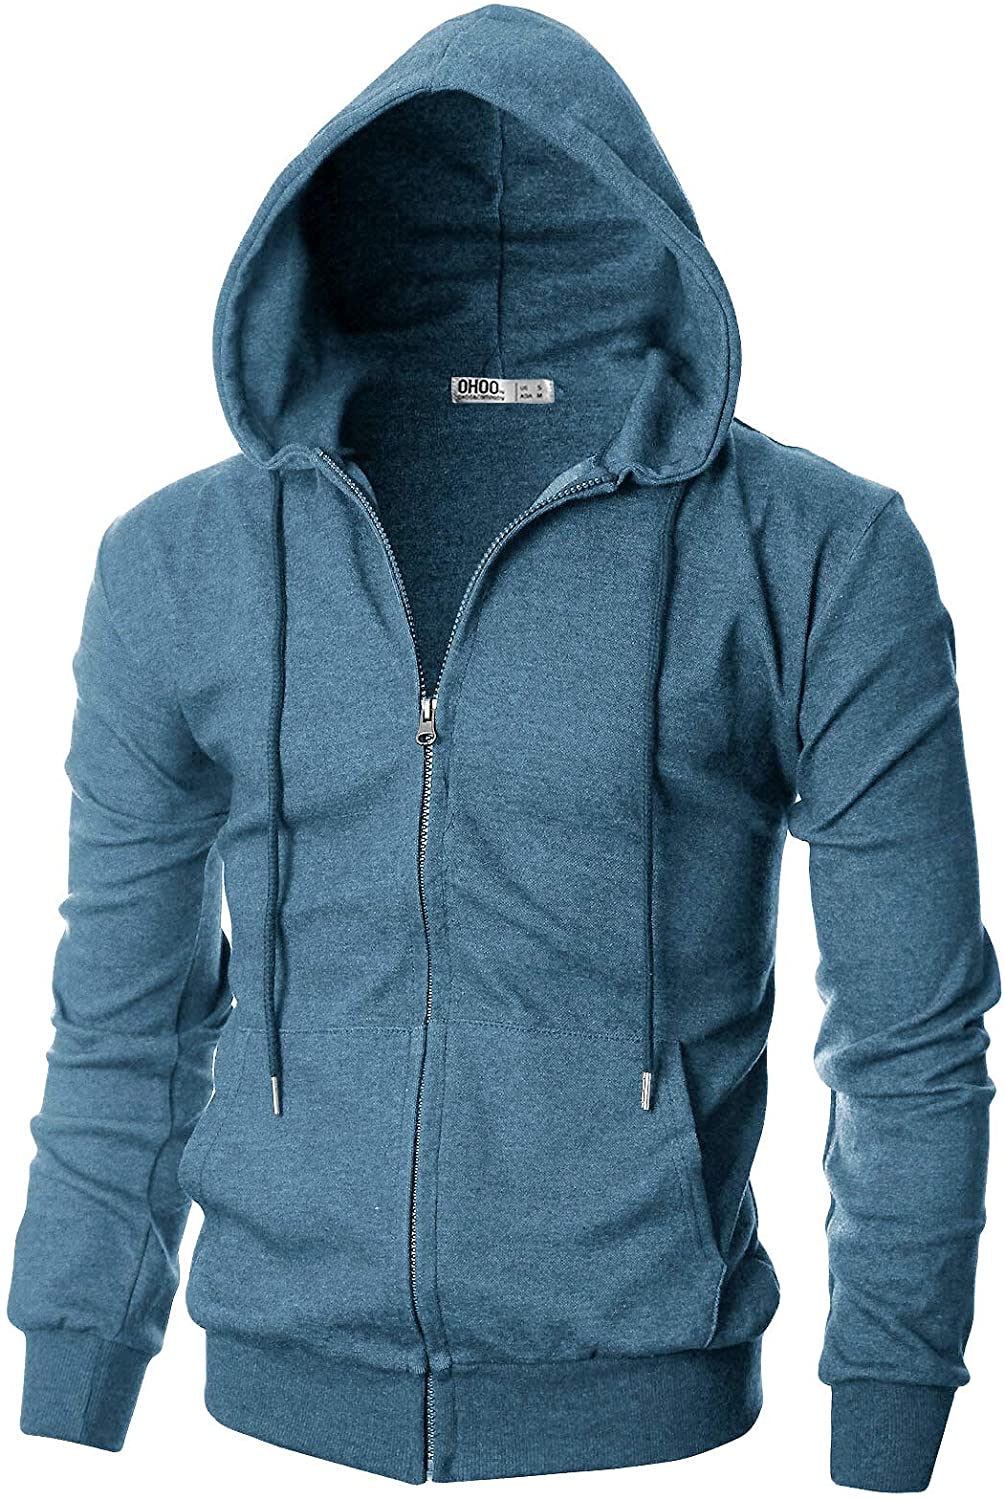 Ohoo Mens Slim Fit Lightweight Zip Up Hoodie with Pockets Long